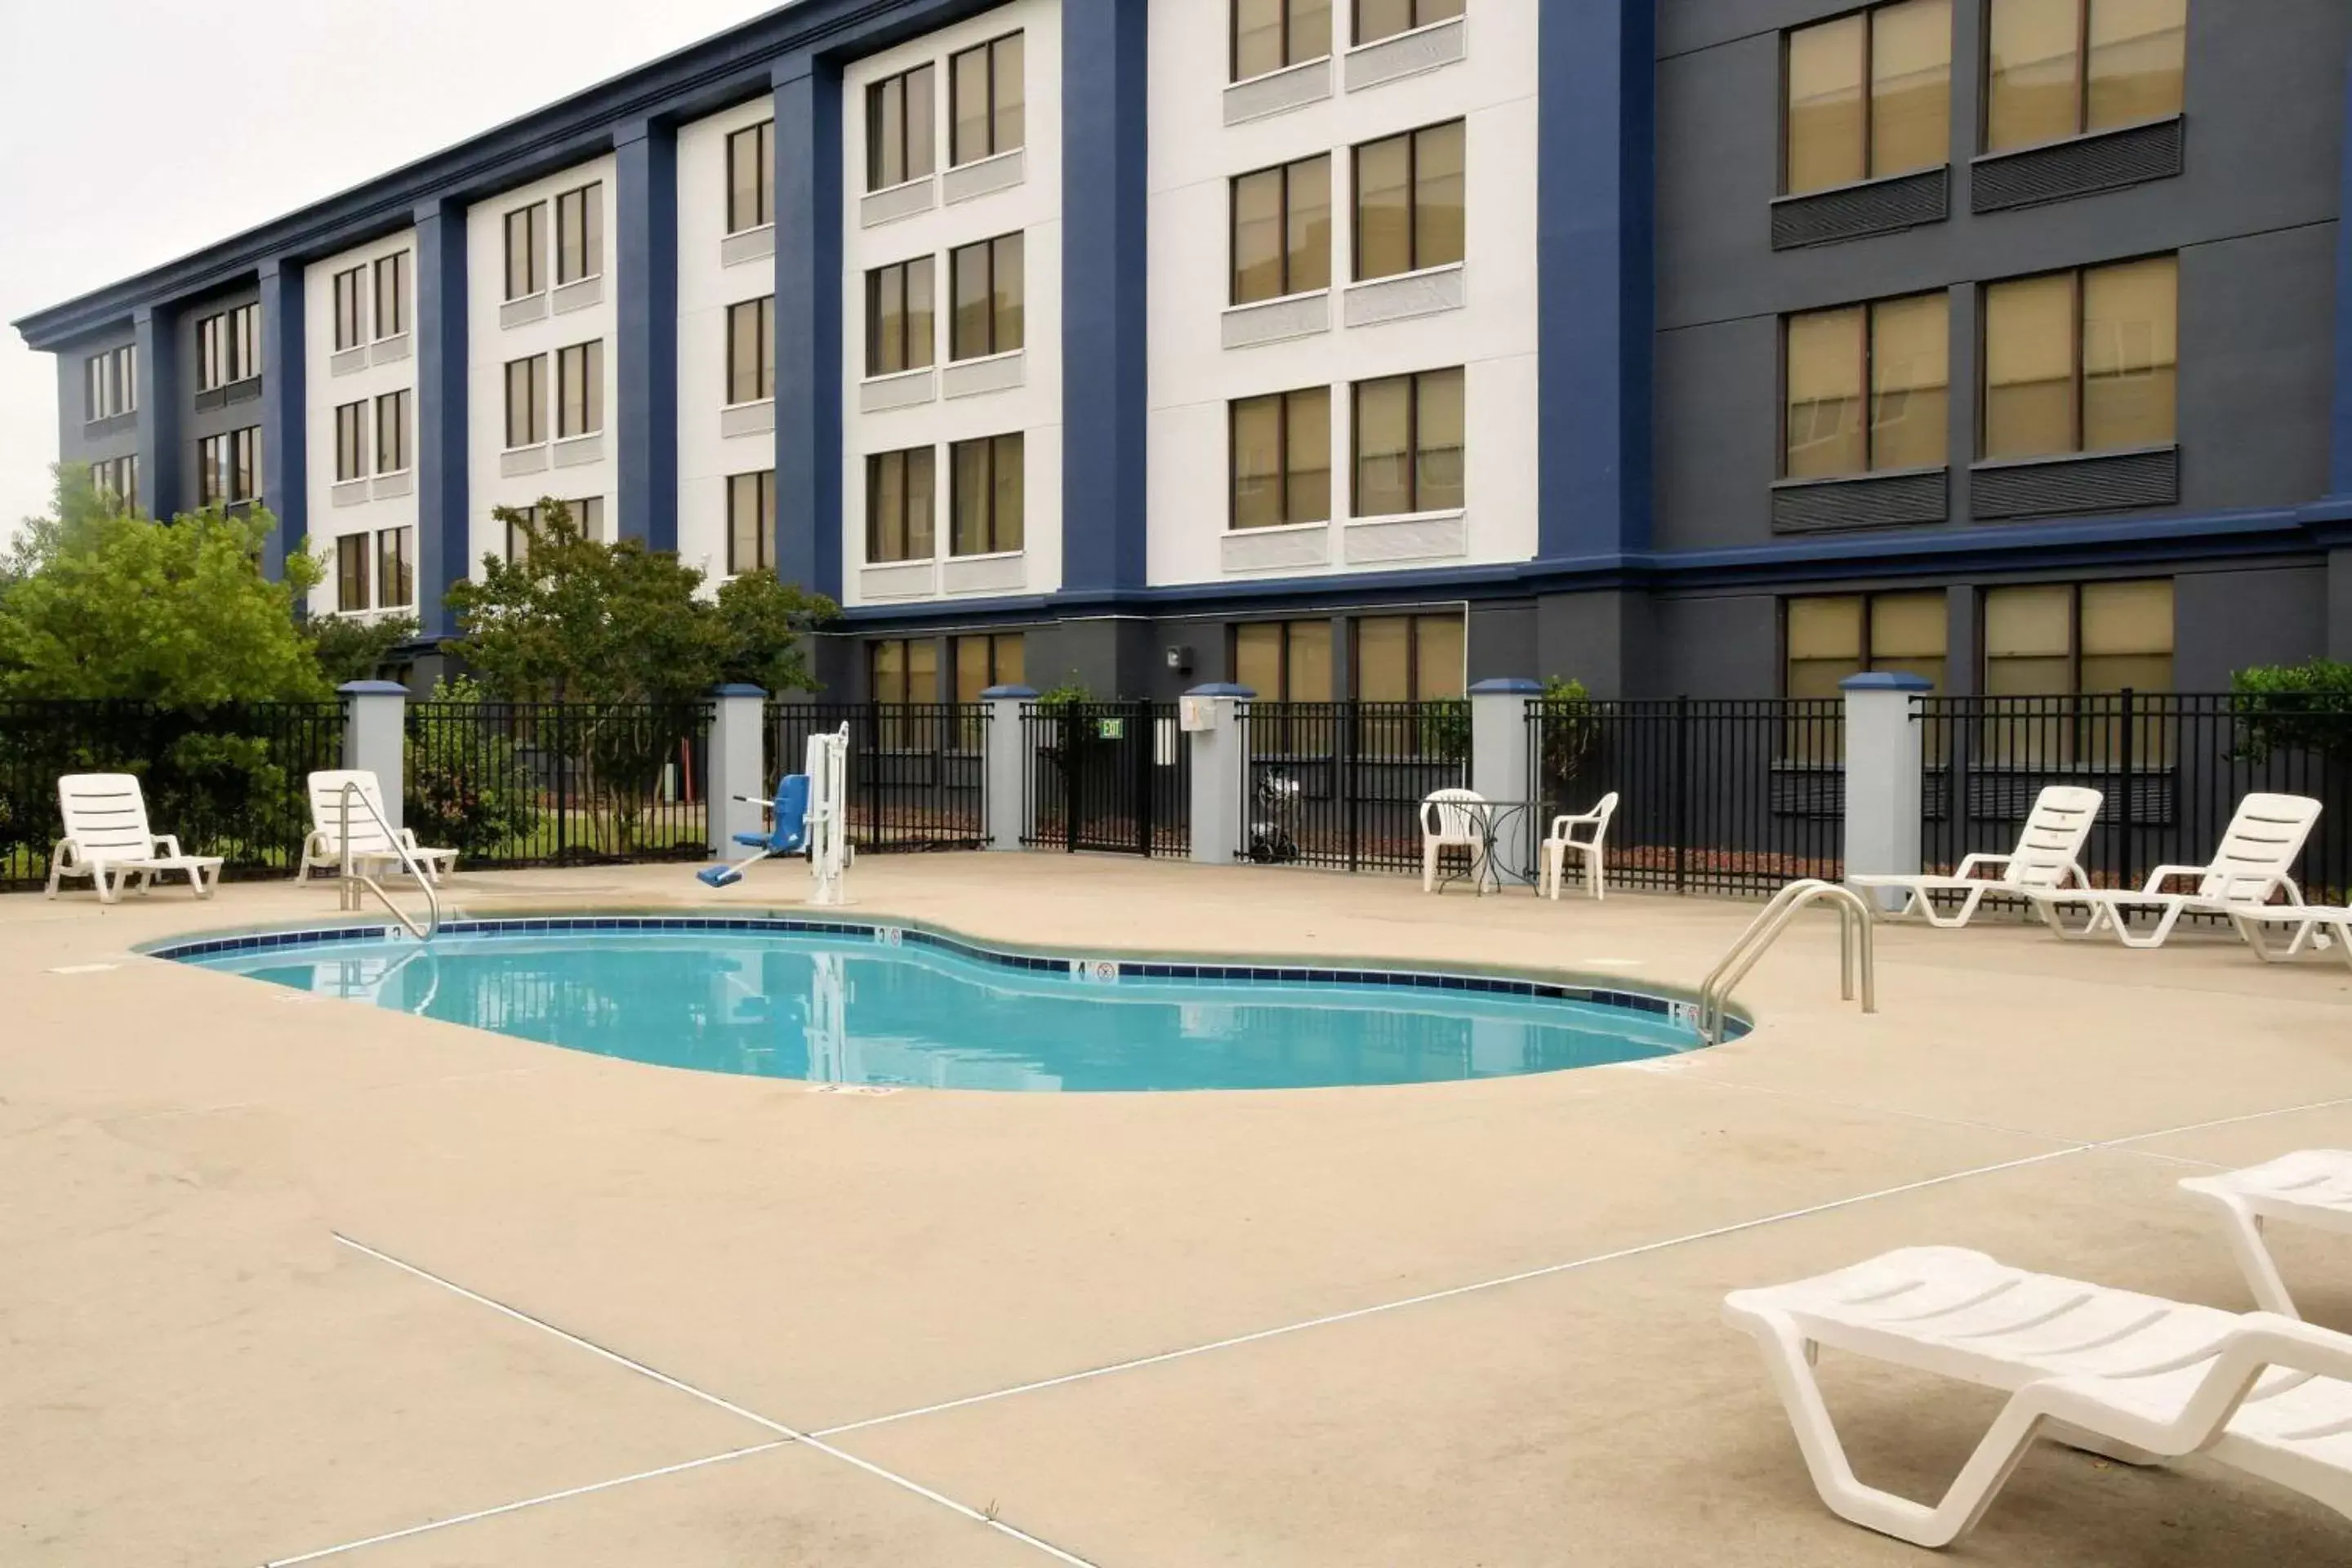 Property building, Swimming Pool in Clarion Pointe Jacksonville near Camp Lejeune